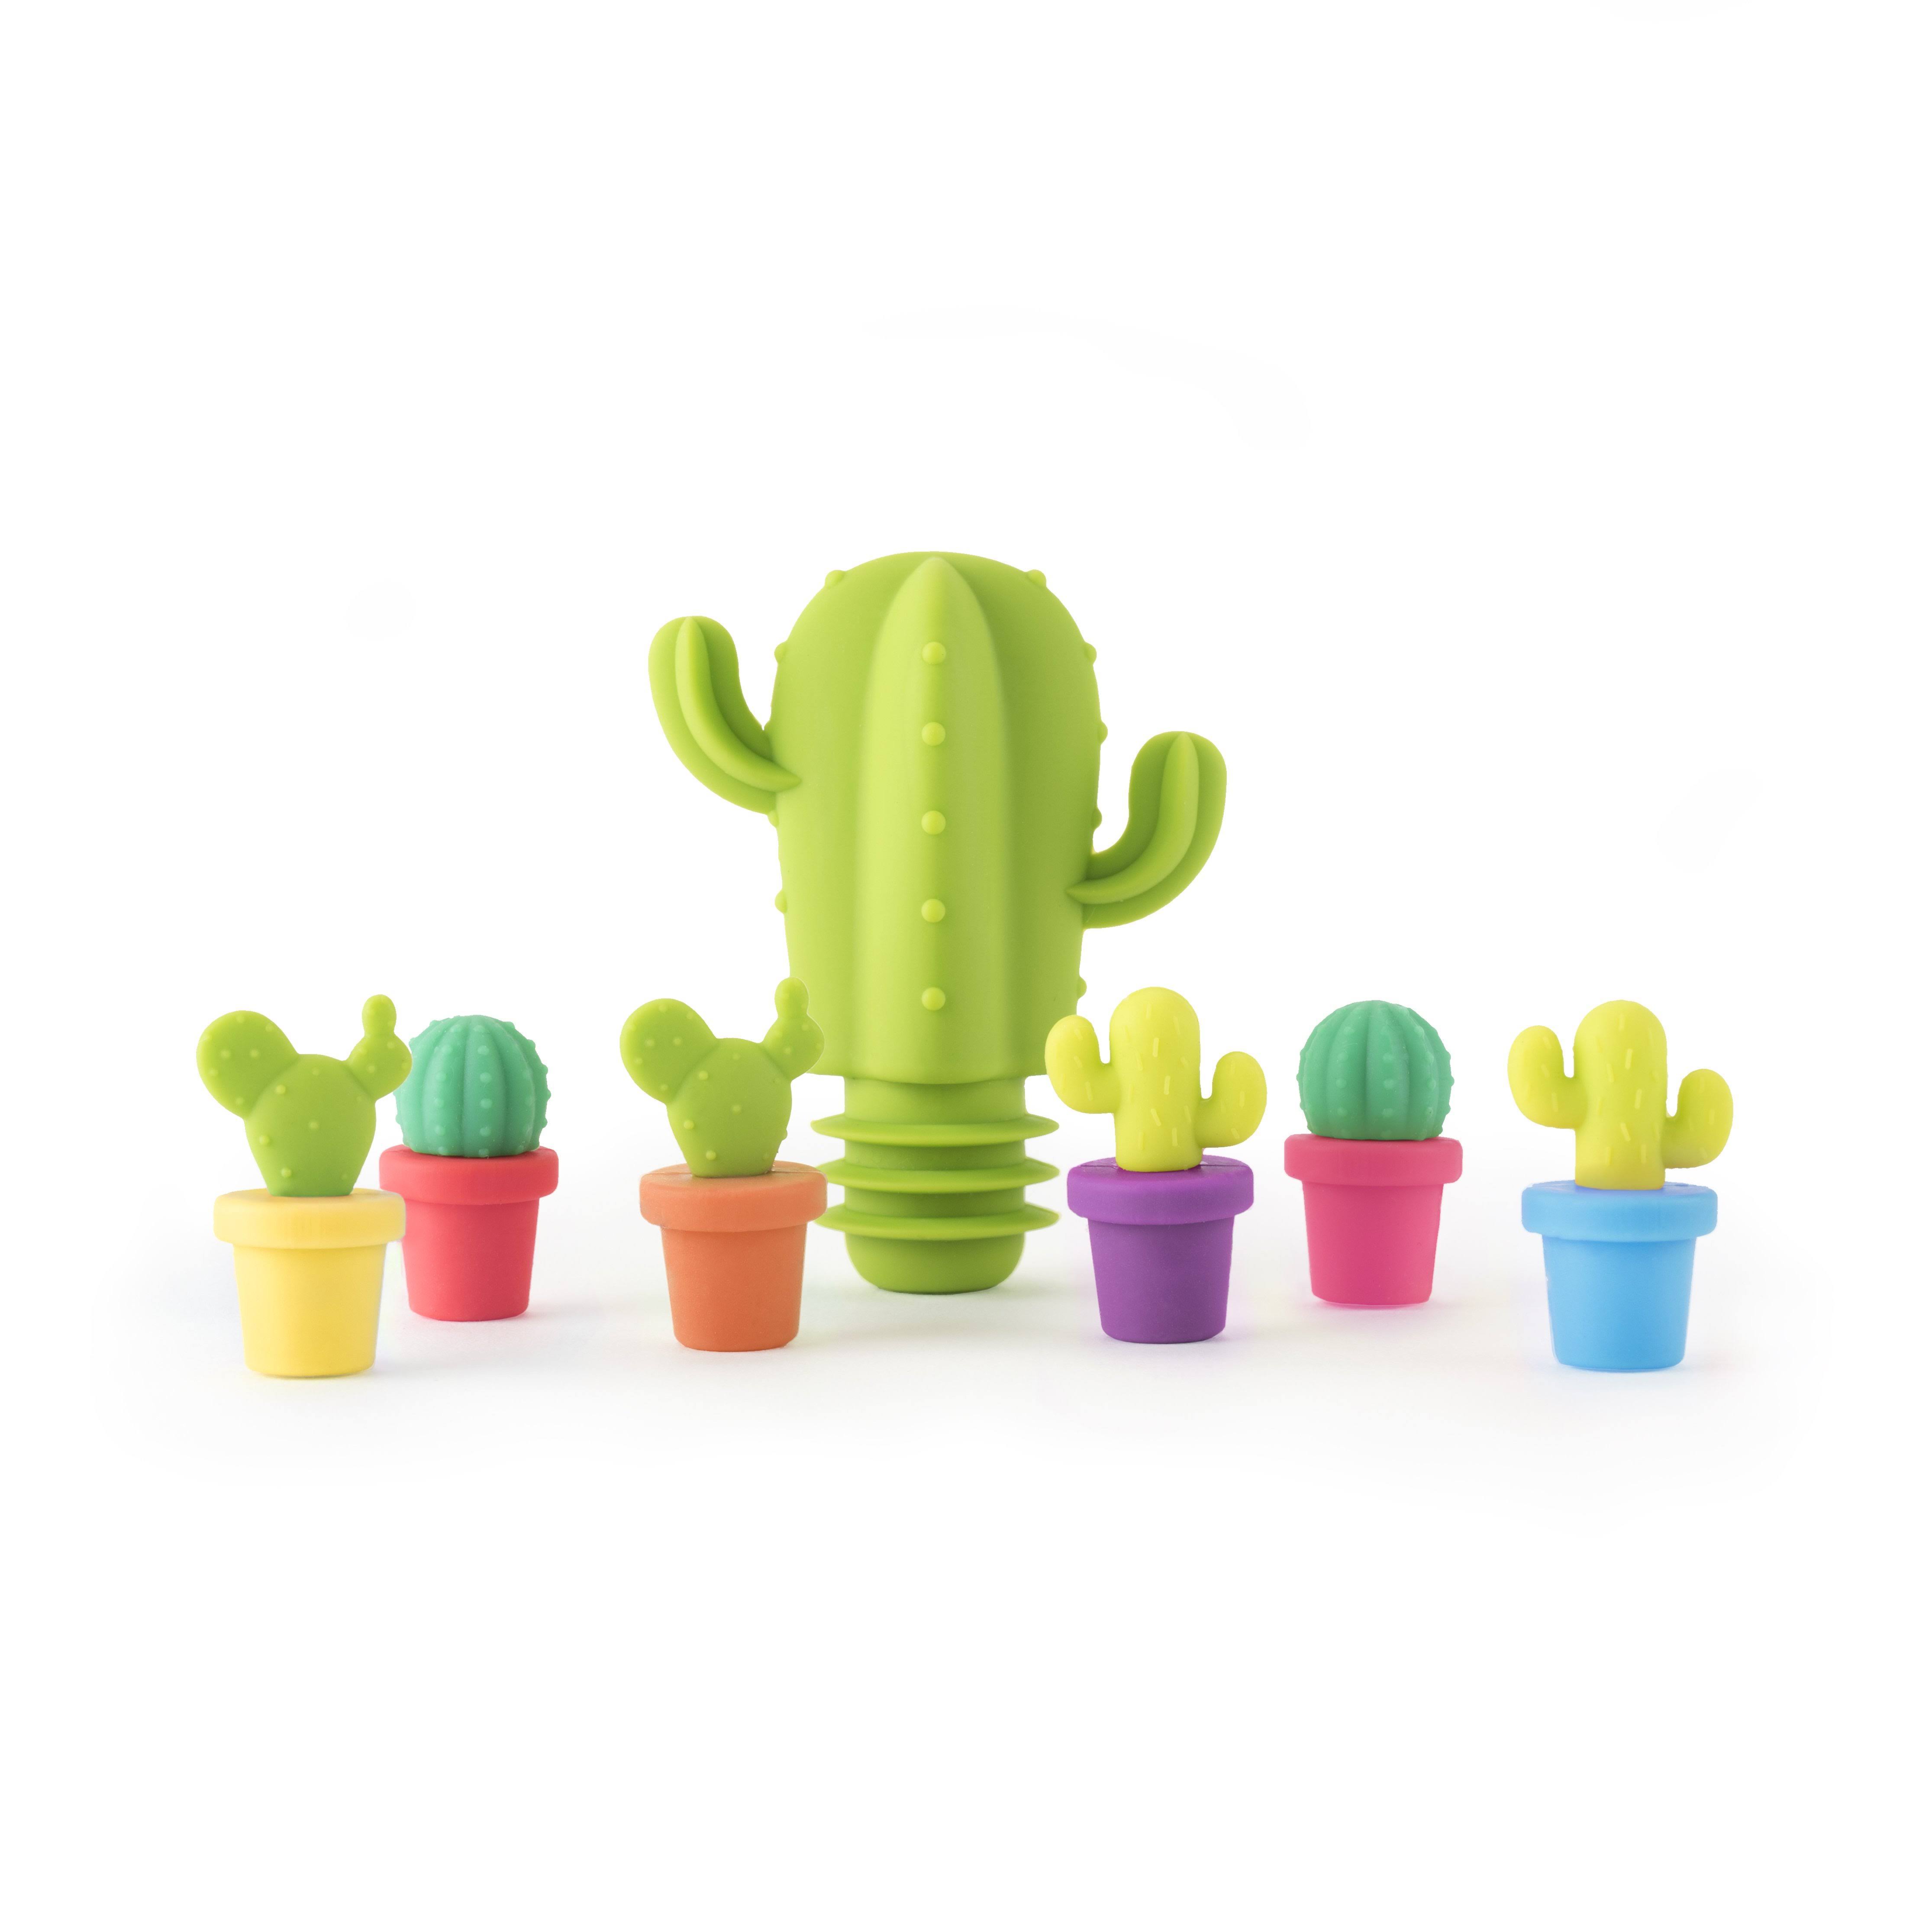 TrueZoo Cactus Stopper and Charm Set - Multicolor